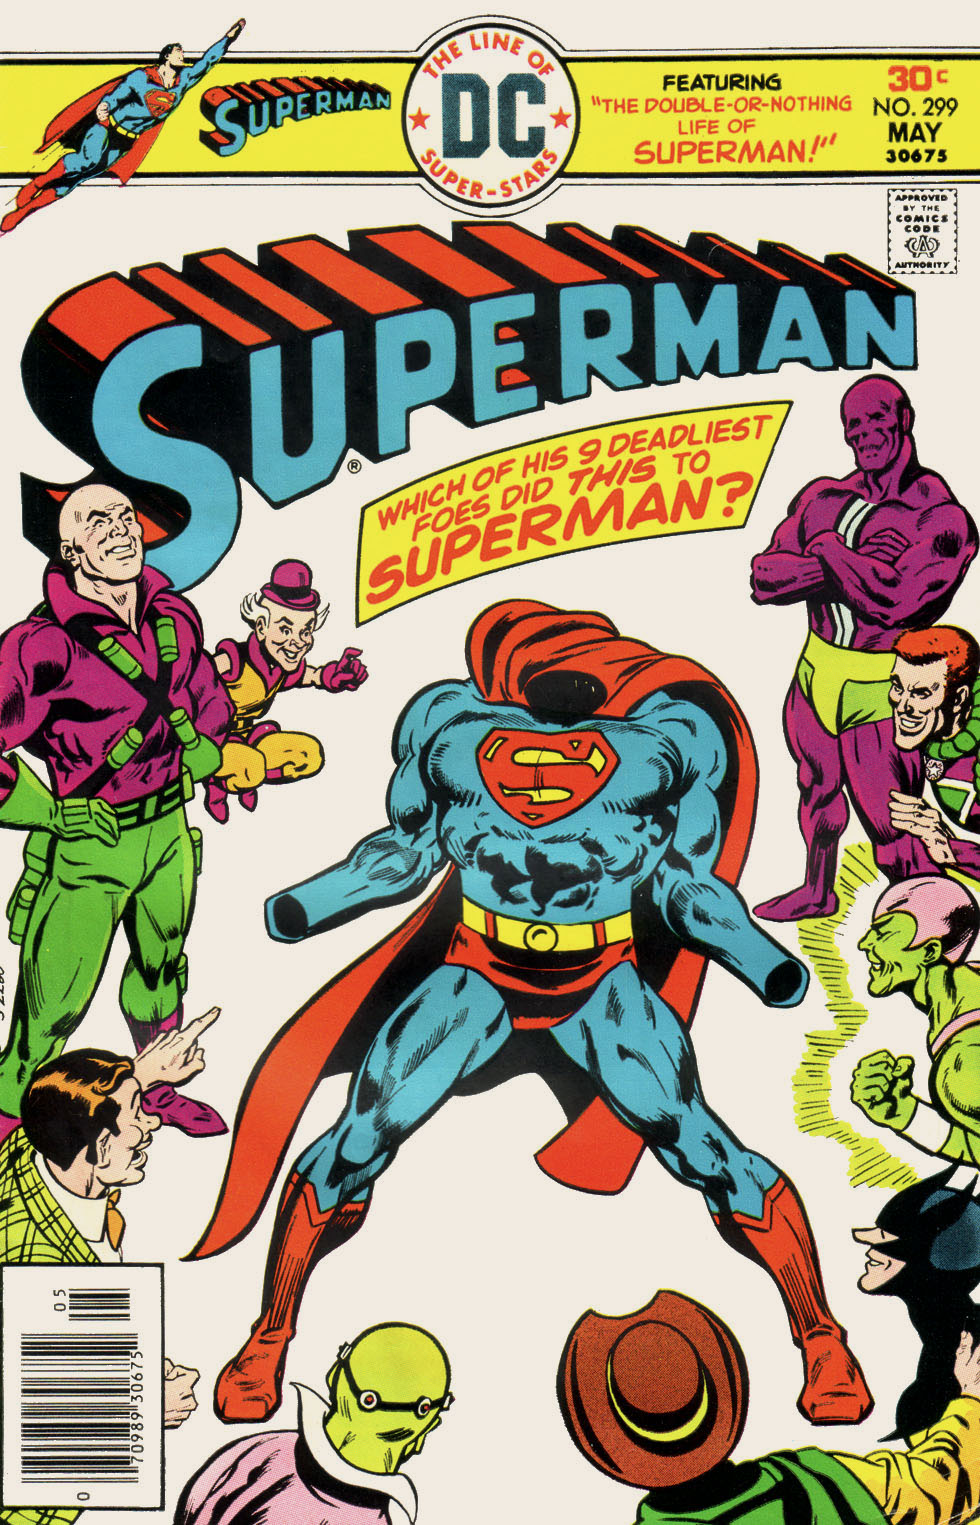 Lex Luthor, Mxyzptlk, Parasite, Amalak, Brainiac, and other villains, most in shades of purple and green, surrounding empty but filled-out, muscular suit of Superman